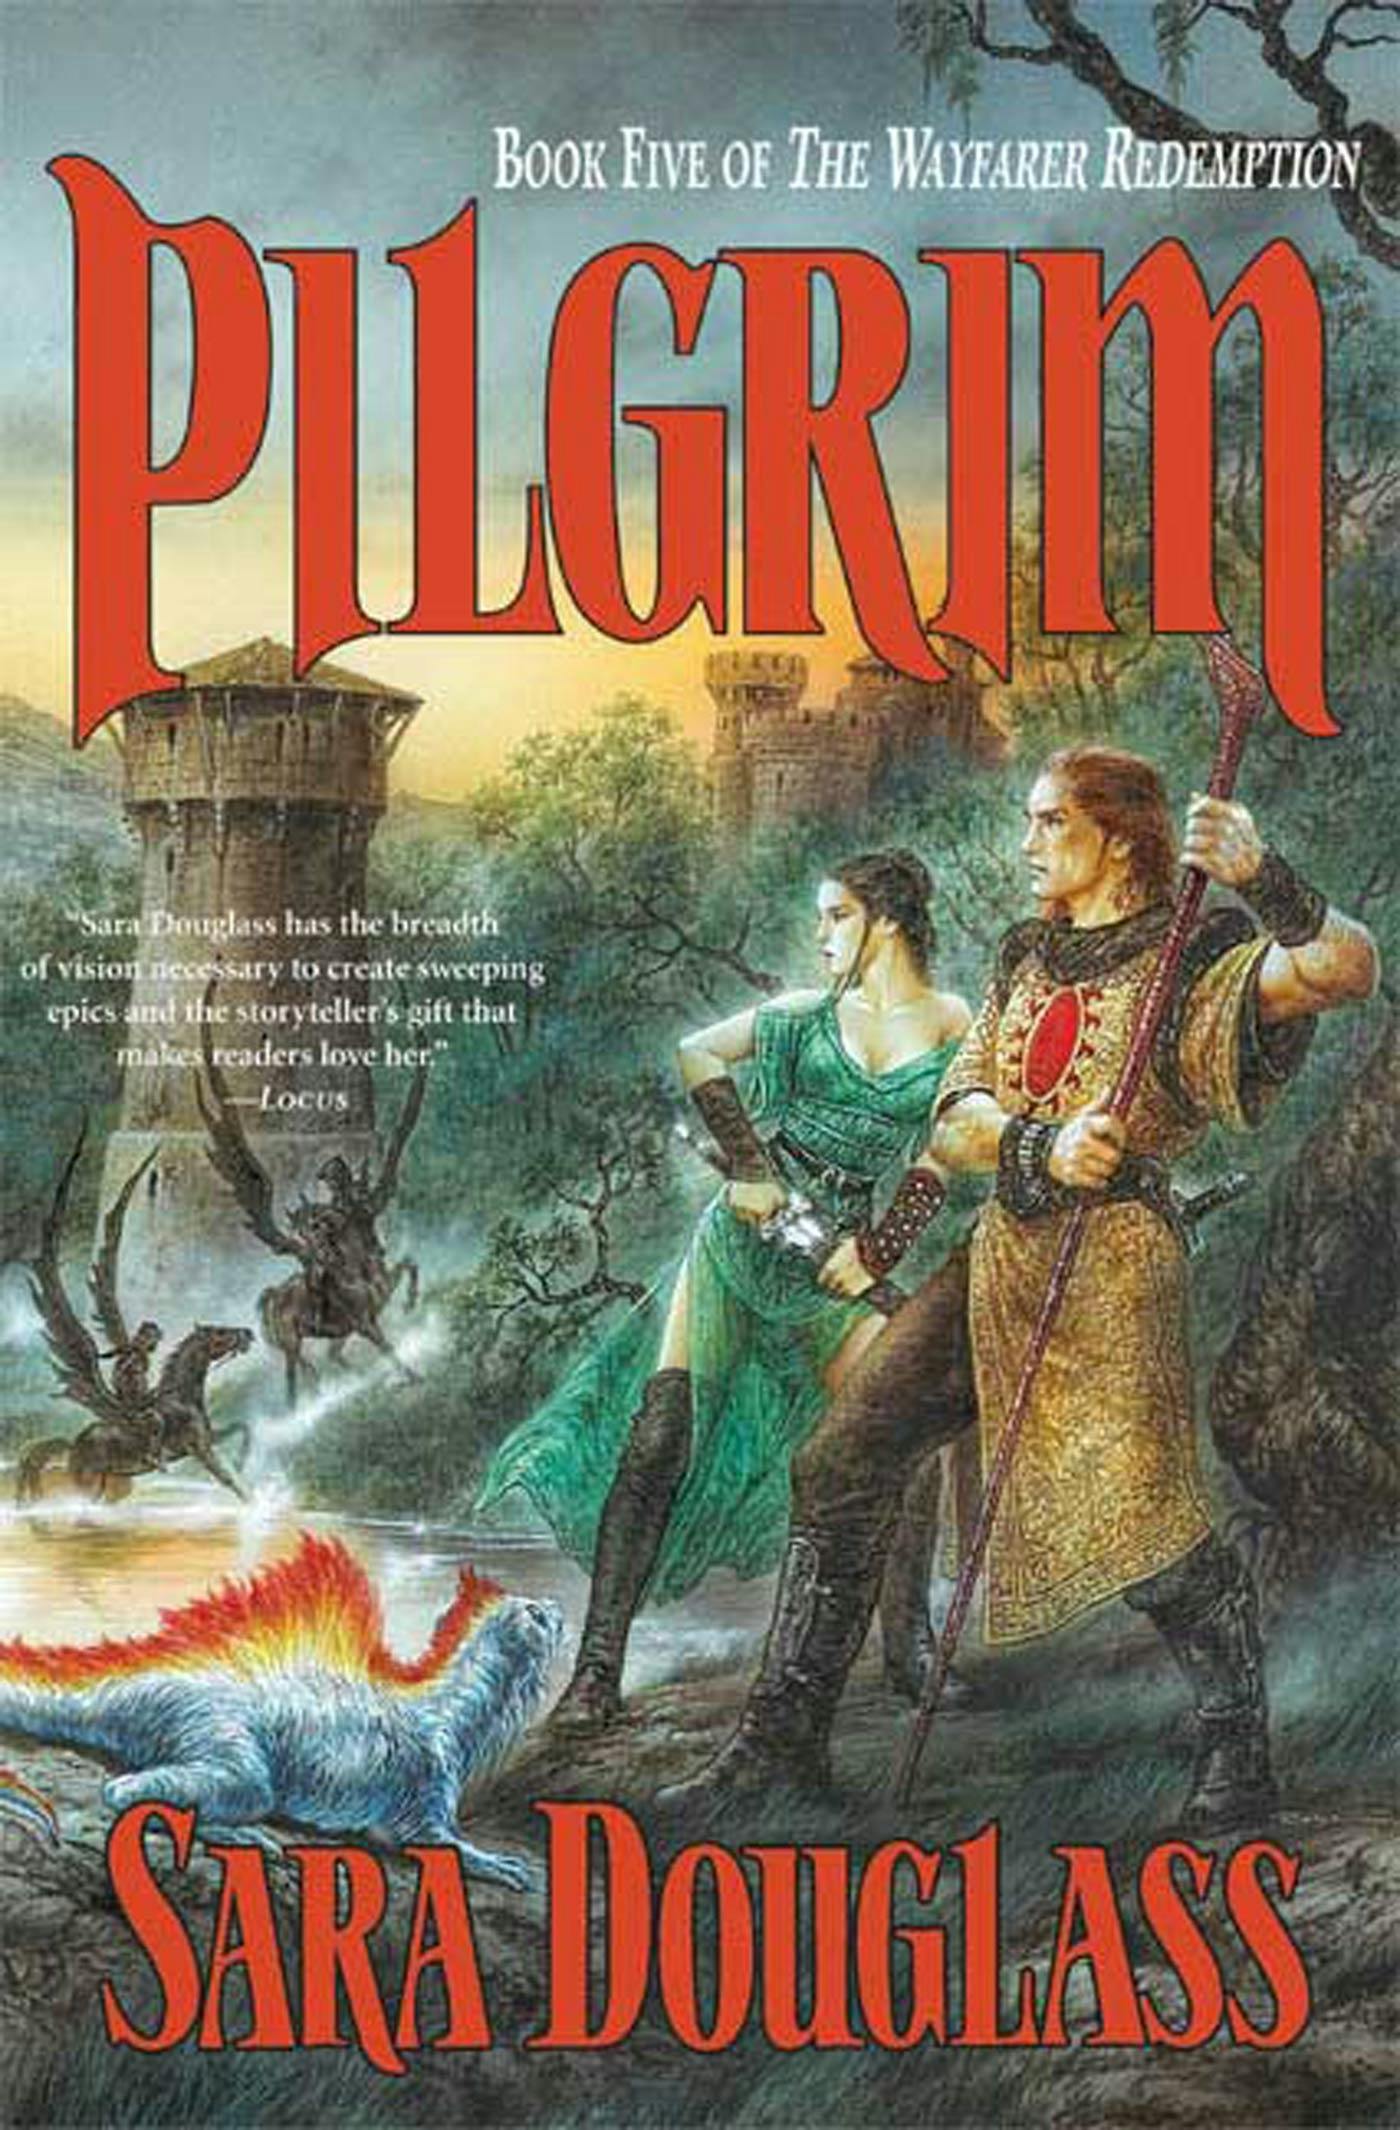 Cover for the book titled as: Pilgrim